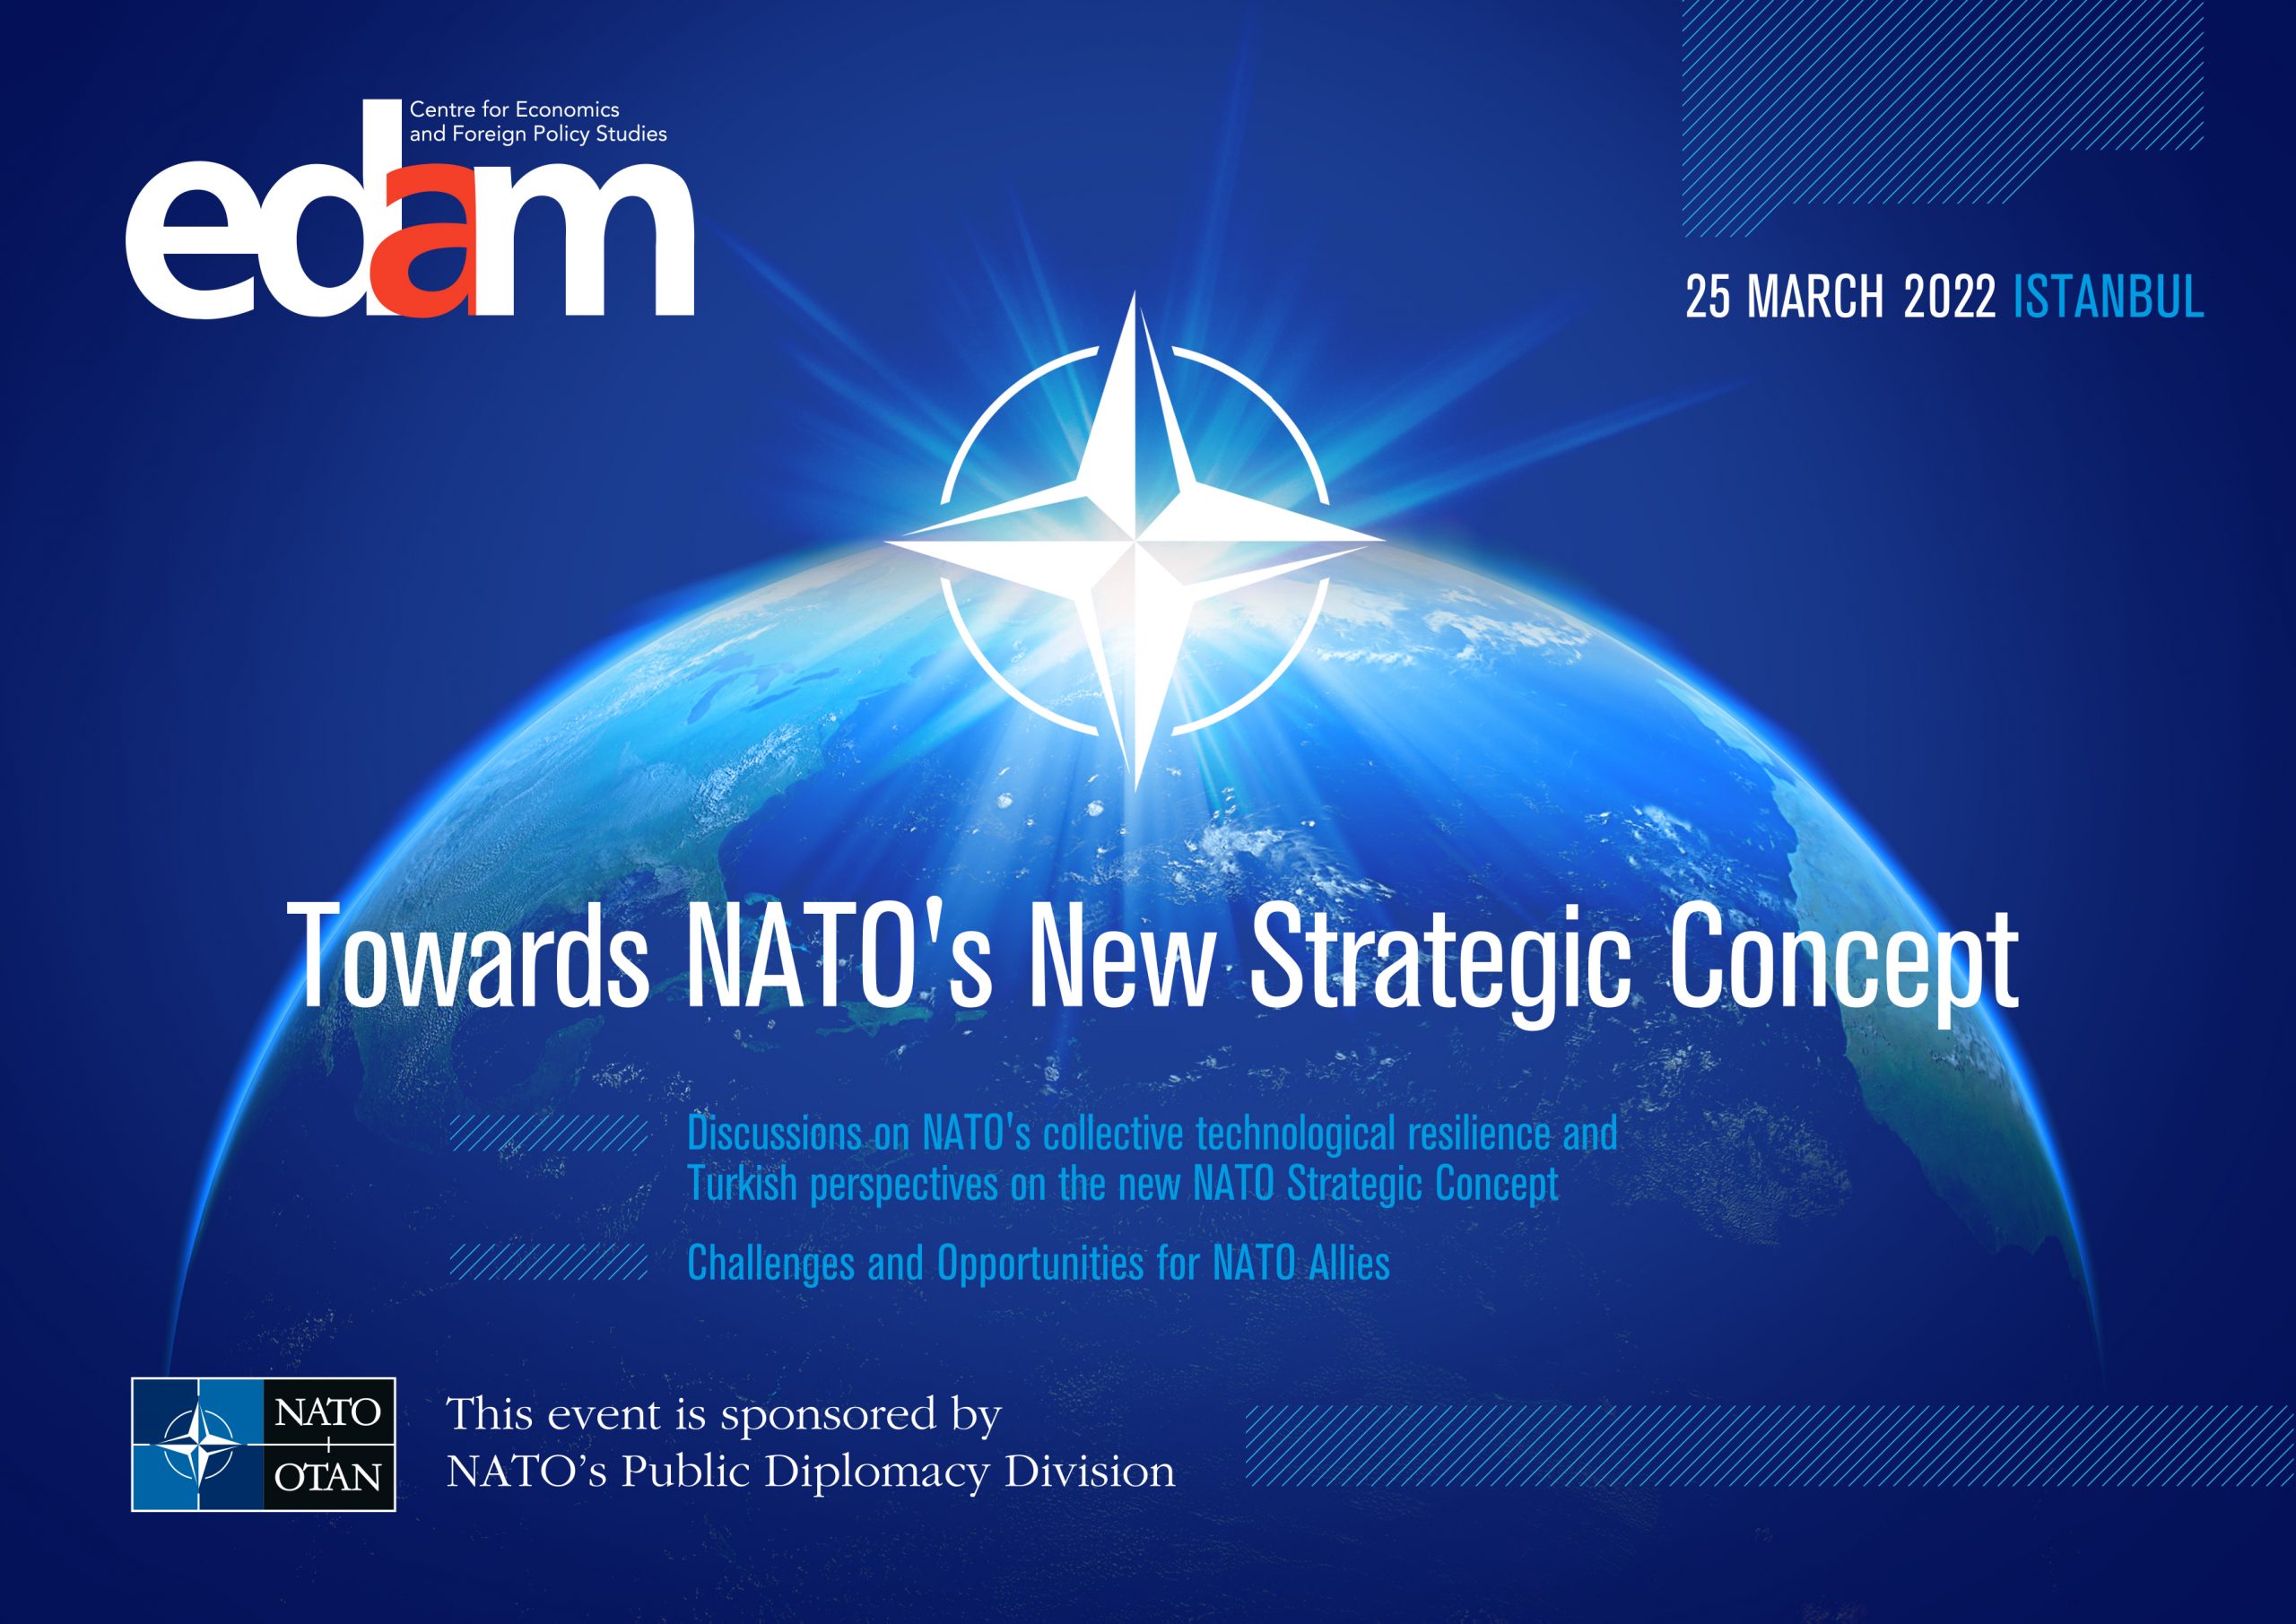 Turkish Perspectives on the New NATO Strategic Concept